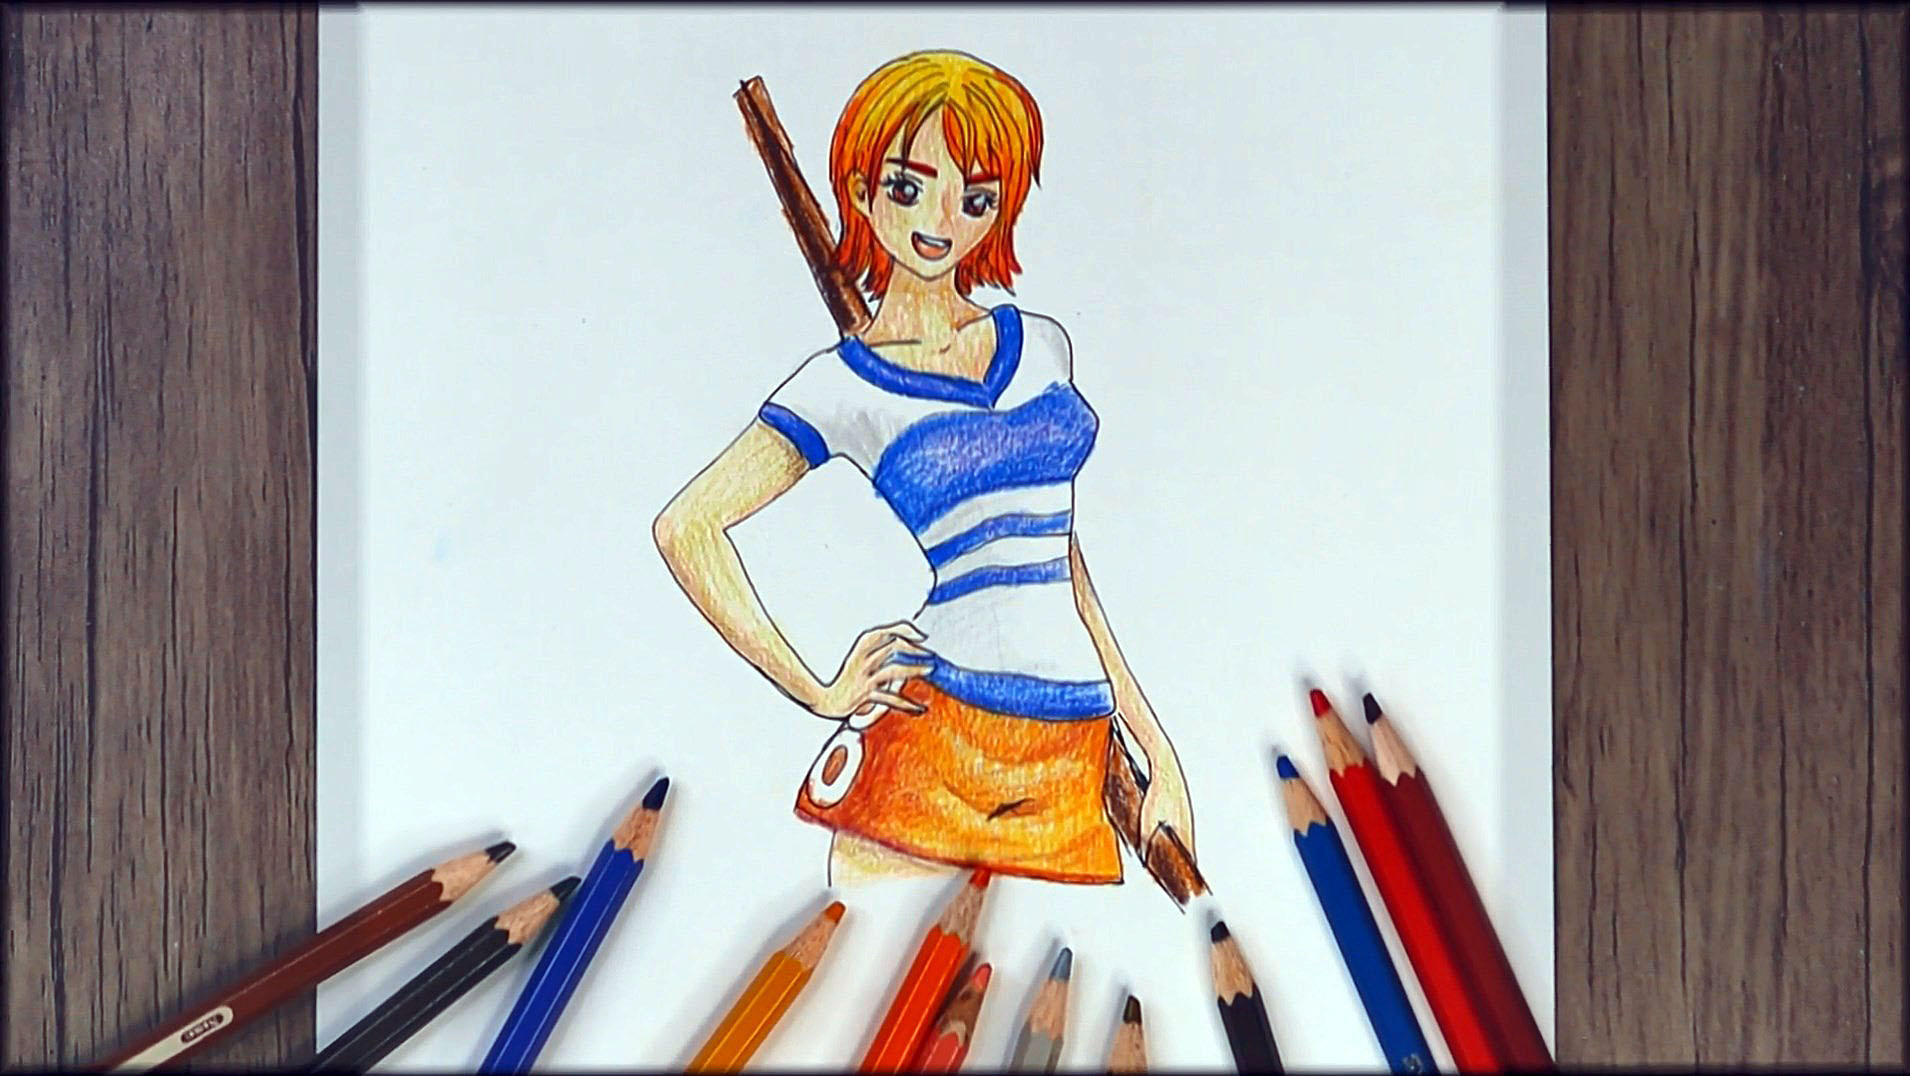 Artoo on Twitter In this video I will show you how to draw Nami from one  piece with colored pencils anime drawing animedrawing Nami  httpstcoUGh3wGjyC8 httpstcoJd0fsyRwmO  Twitter